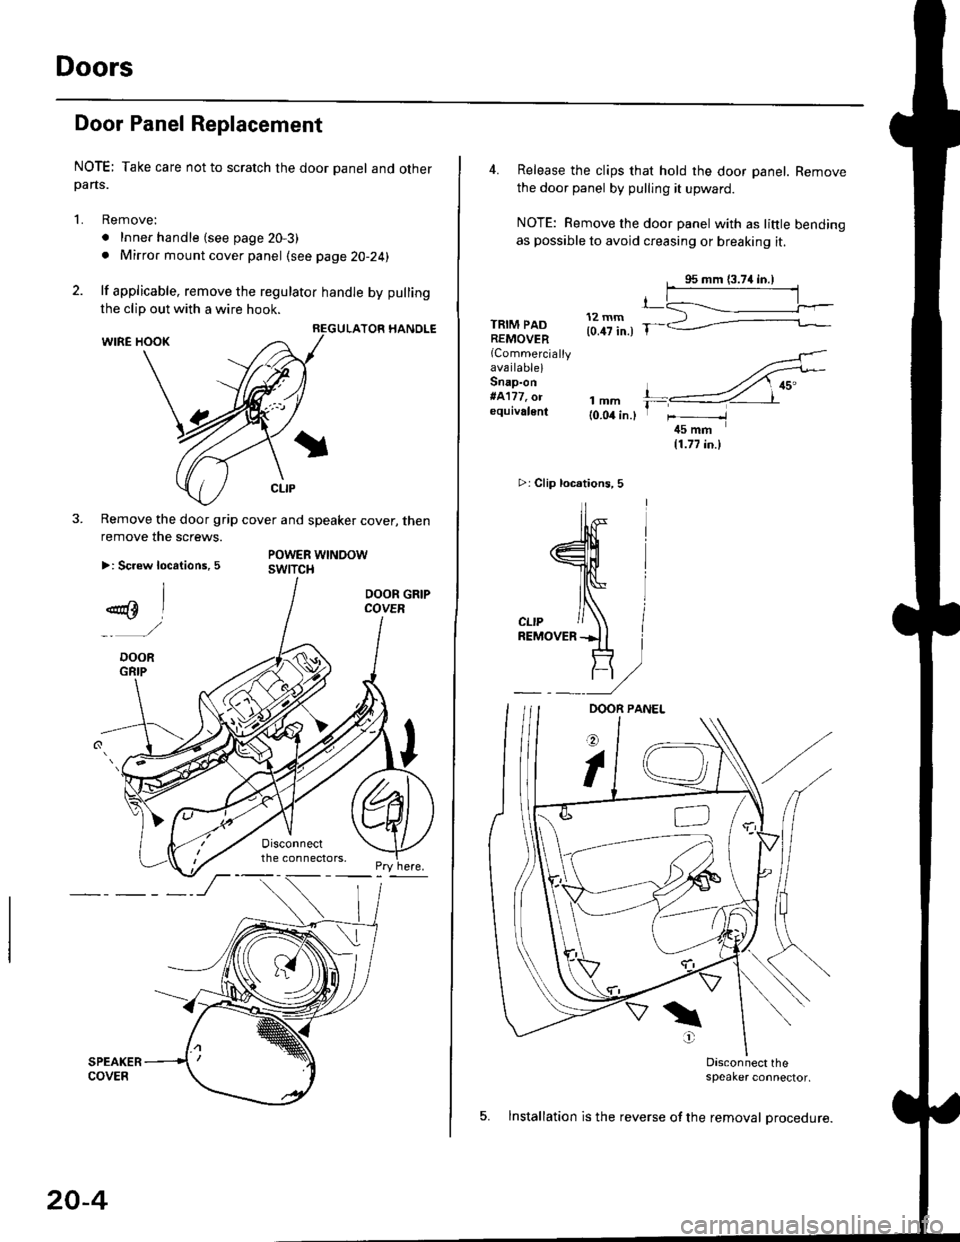 HONDA CIVIC 1998 6.G Workshop Manual Doors
Door Panel Replacement
NOTE; Take care not to scratch the door panel and otherpans.
1. Remove:
. Inner handle (see page 20-3)
. Mirror mount cover panel (see page 20-24)
2. lf applicable, remove